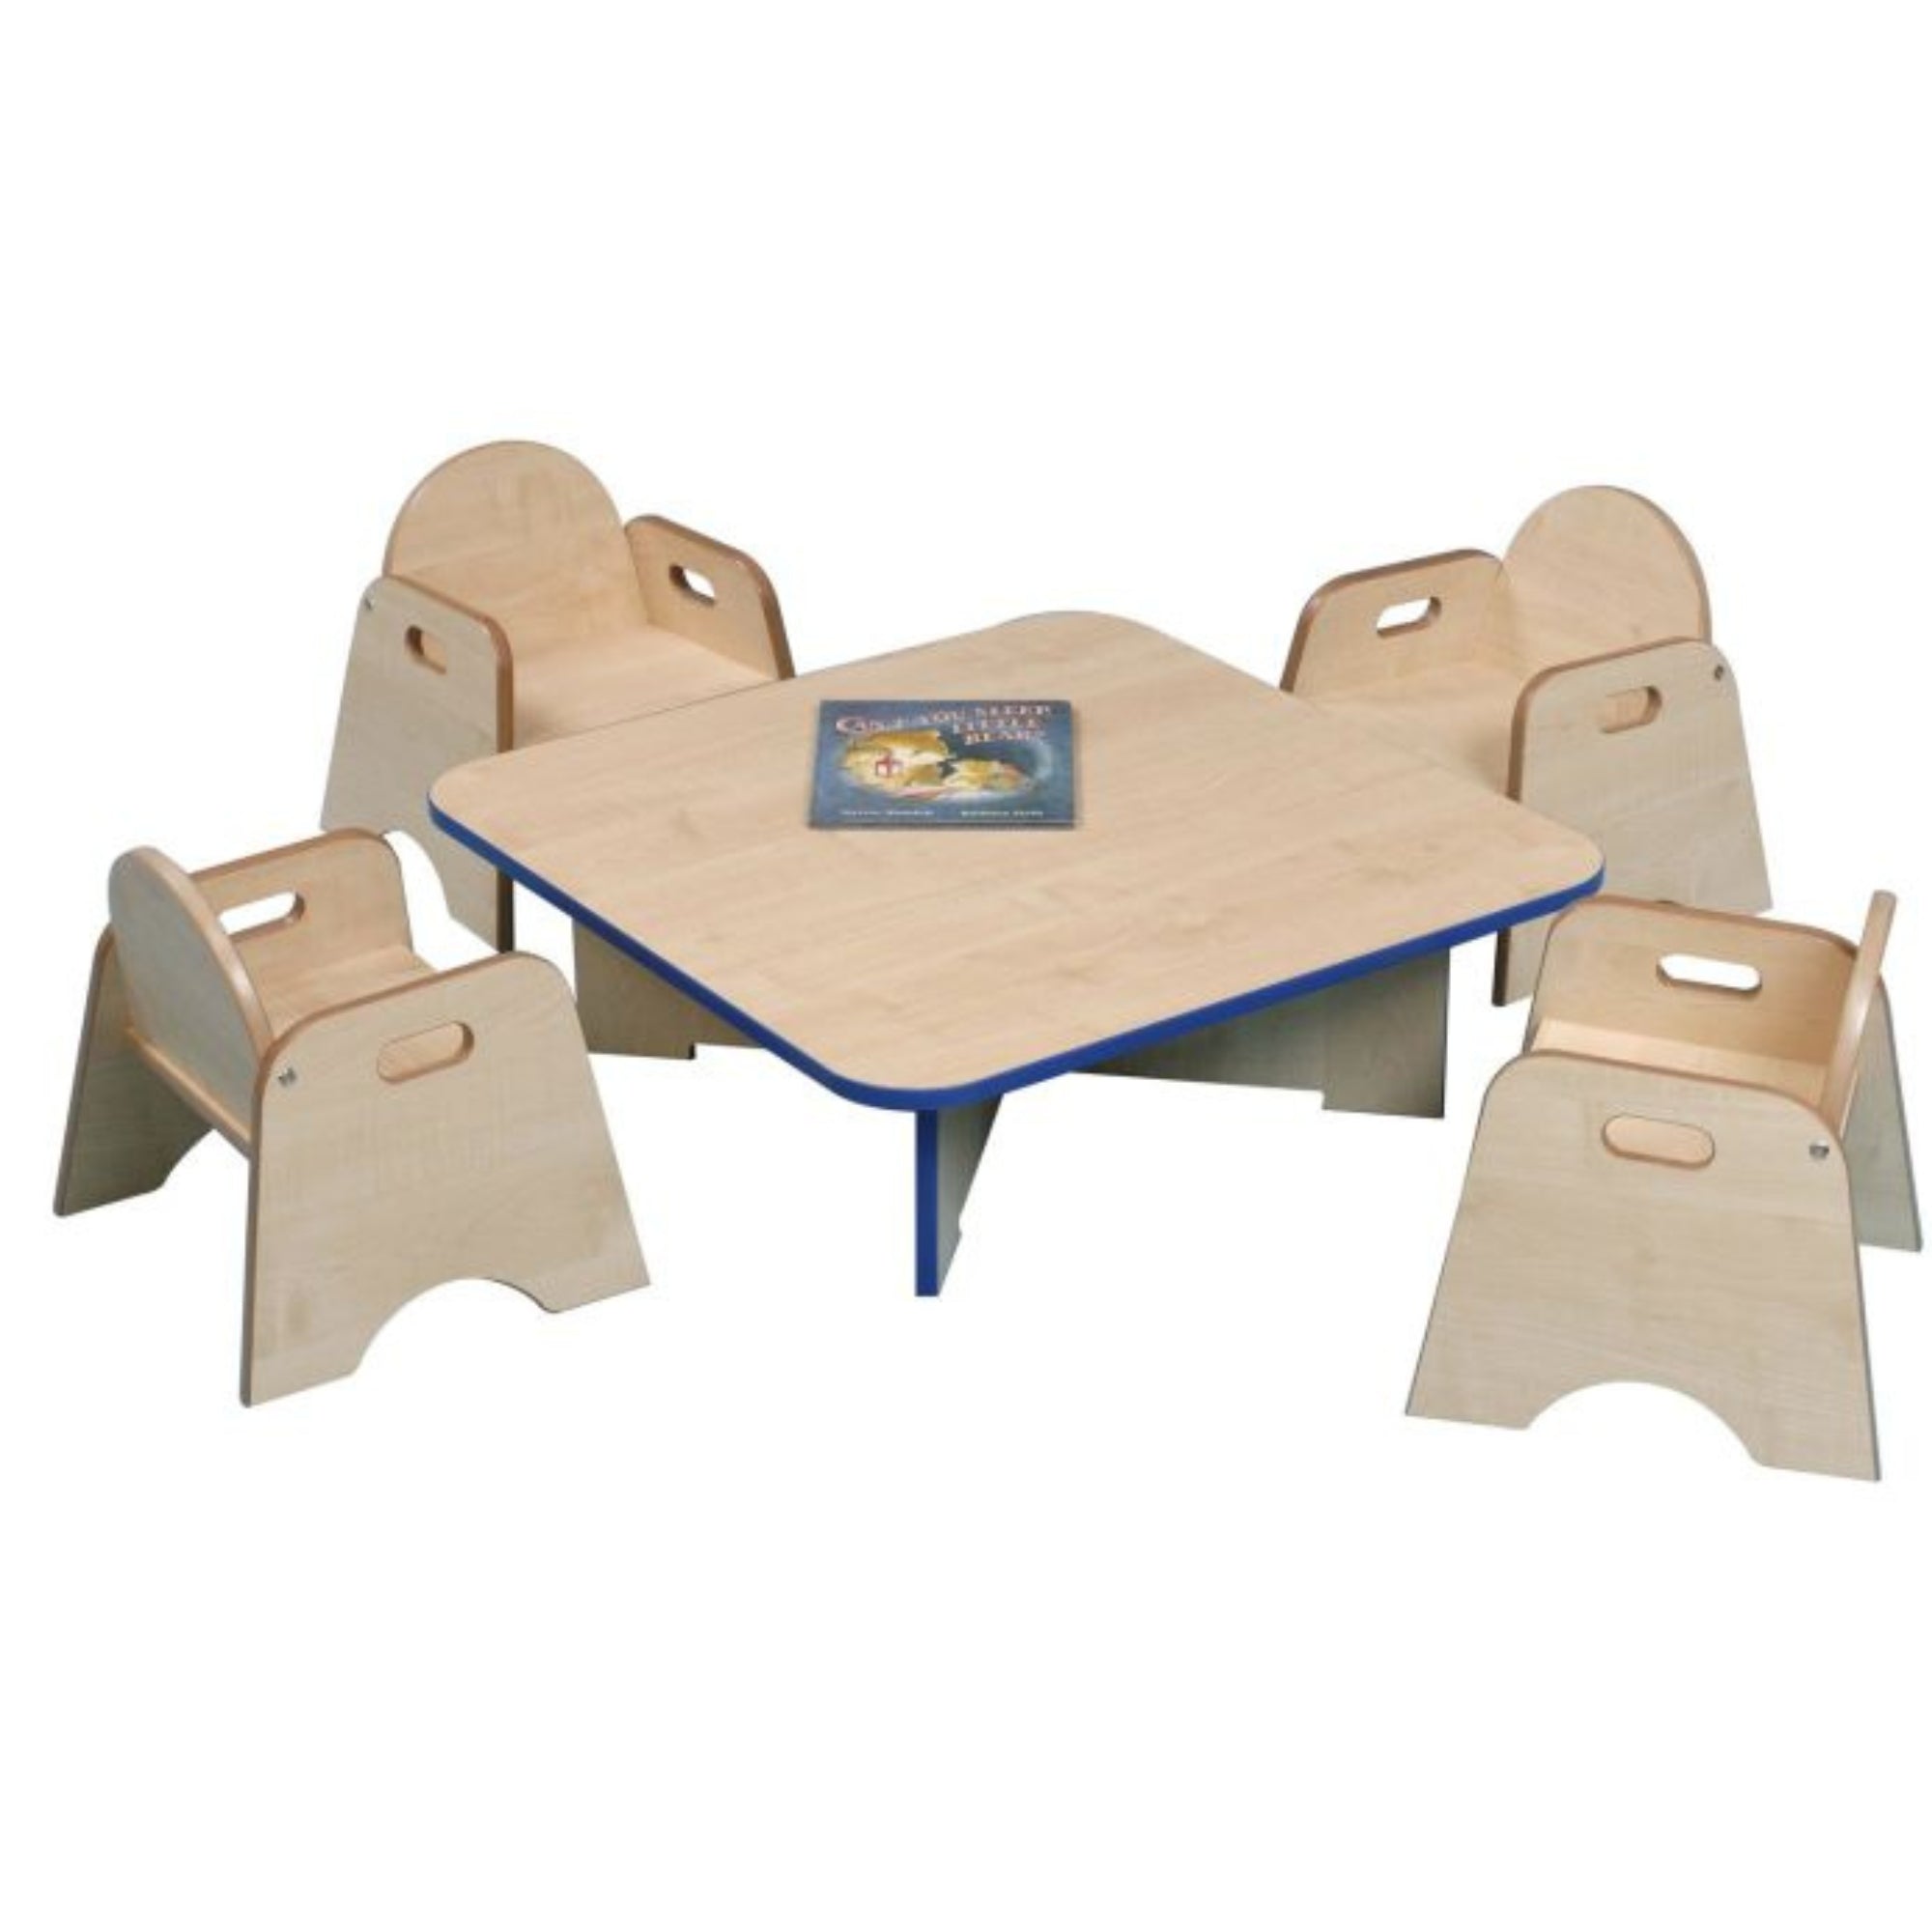 Denby Low Classroom Table, Introducing the Denby Low Classroom Table, designed specifically to cater to the needs of young learners in nurseries and early years classrooms. This low table is perfect for young children to sit comfortably around and participate in activities with other children. Crafted with top-quality materials, the Denby Low Classroom Table is made from 18mm maple MFC with PVC edging, ensuring durability and longevity. The table comes with curved corners, making it safe for children to use